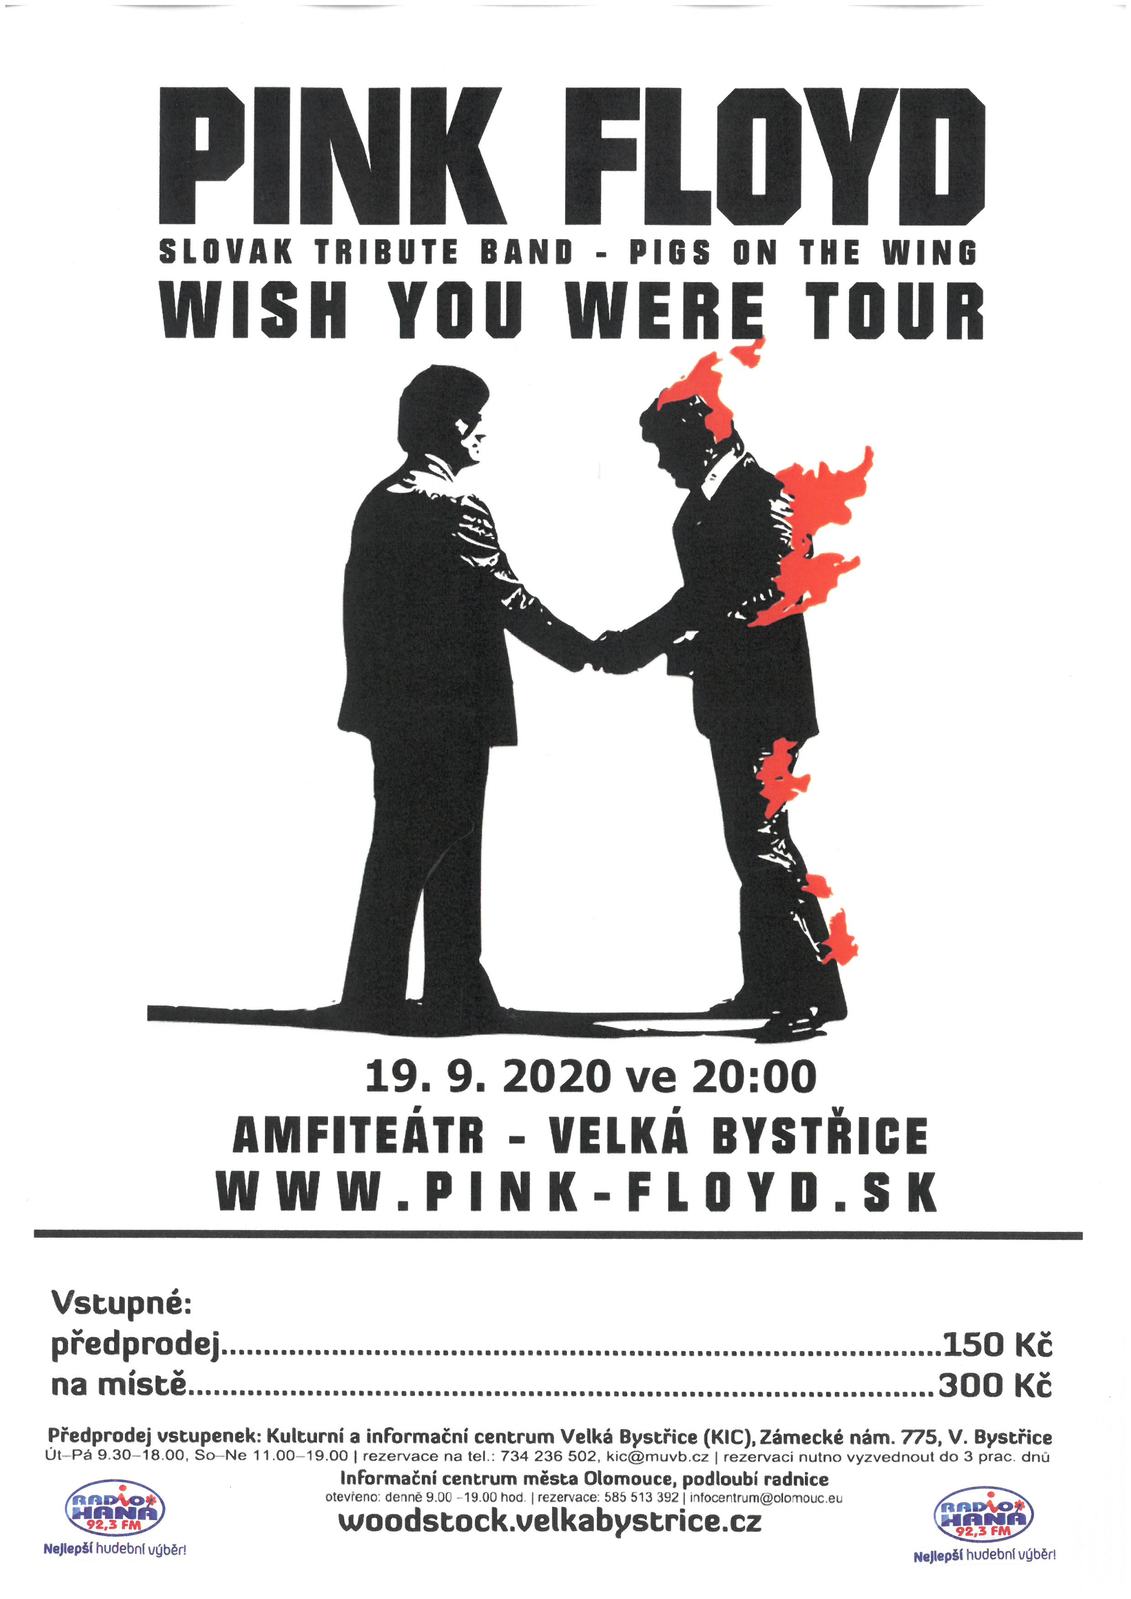 Pink Floyd: Wish you were tour